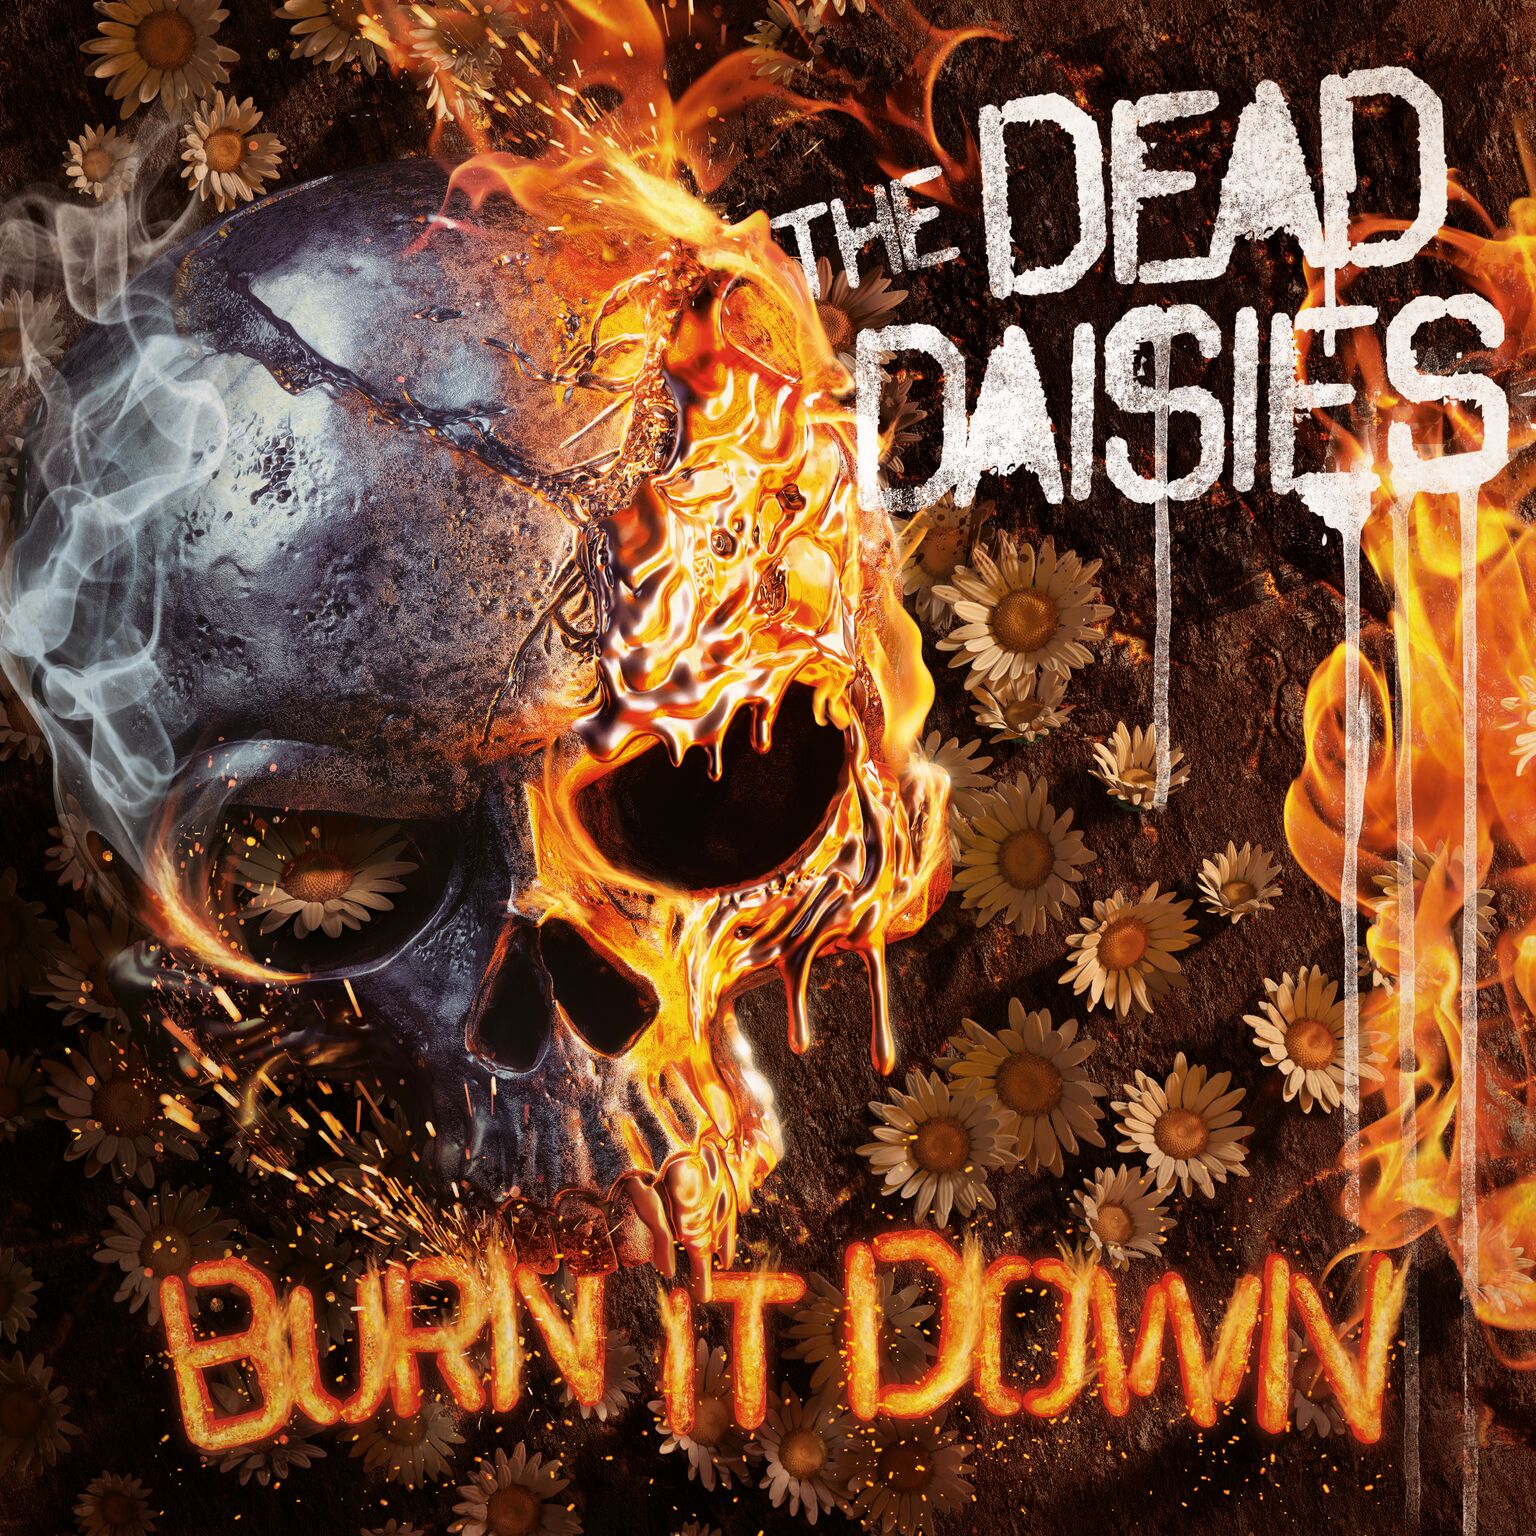 THE DEAD DAISIES SET TO BURN IT DOWN IN 2018